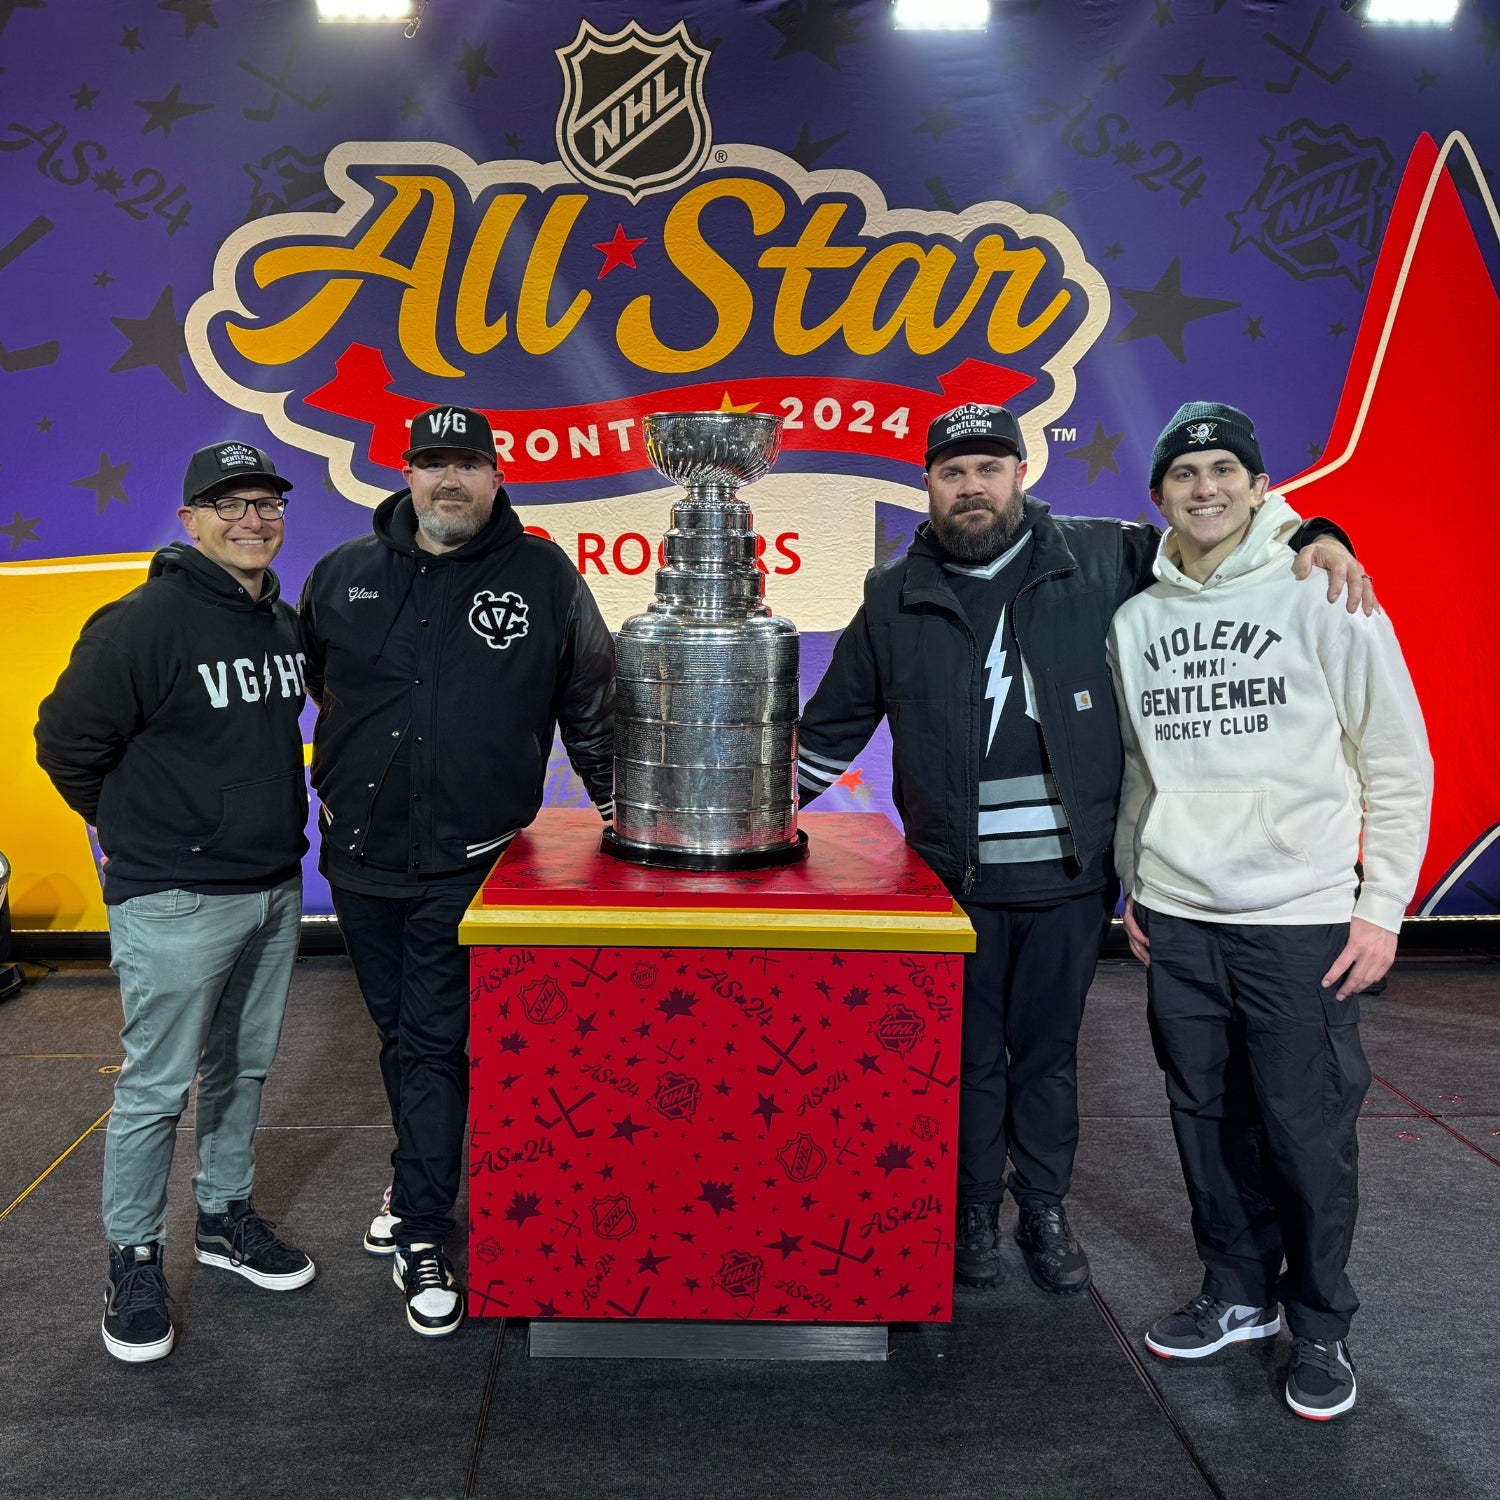 We sent some of the crew out to Toronto a few weeks ago to check out the NHL All Star game for some work and play. Safe to say the trip did not disappoint! Lifetipsforbetterliving's very own "dad" reflects back on his trip to share some of the highlights. Check it out!